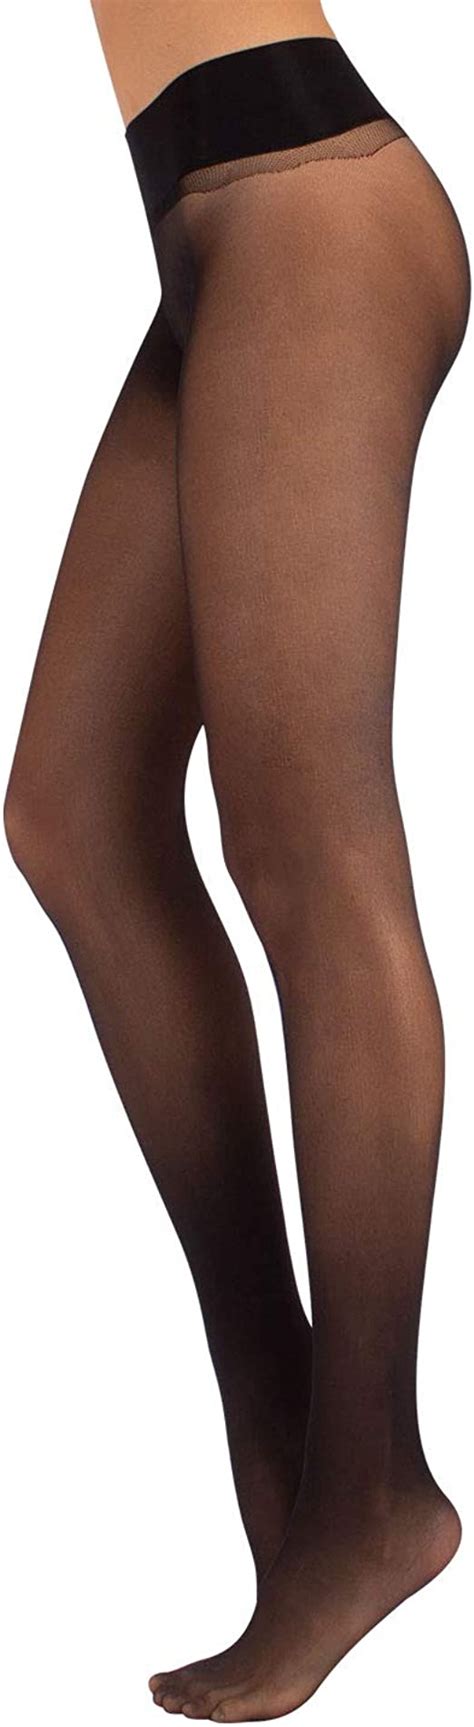 Calzitaly Seamless Sheer Tights Plain Or With Polka Dots Black Skin Blue S M L L Xl